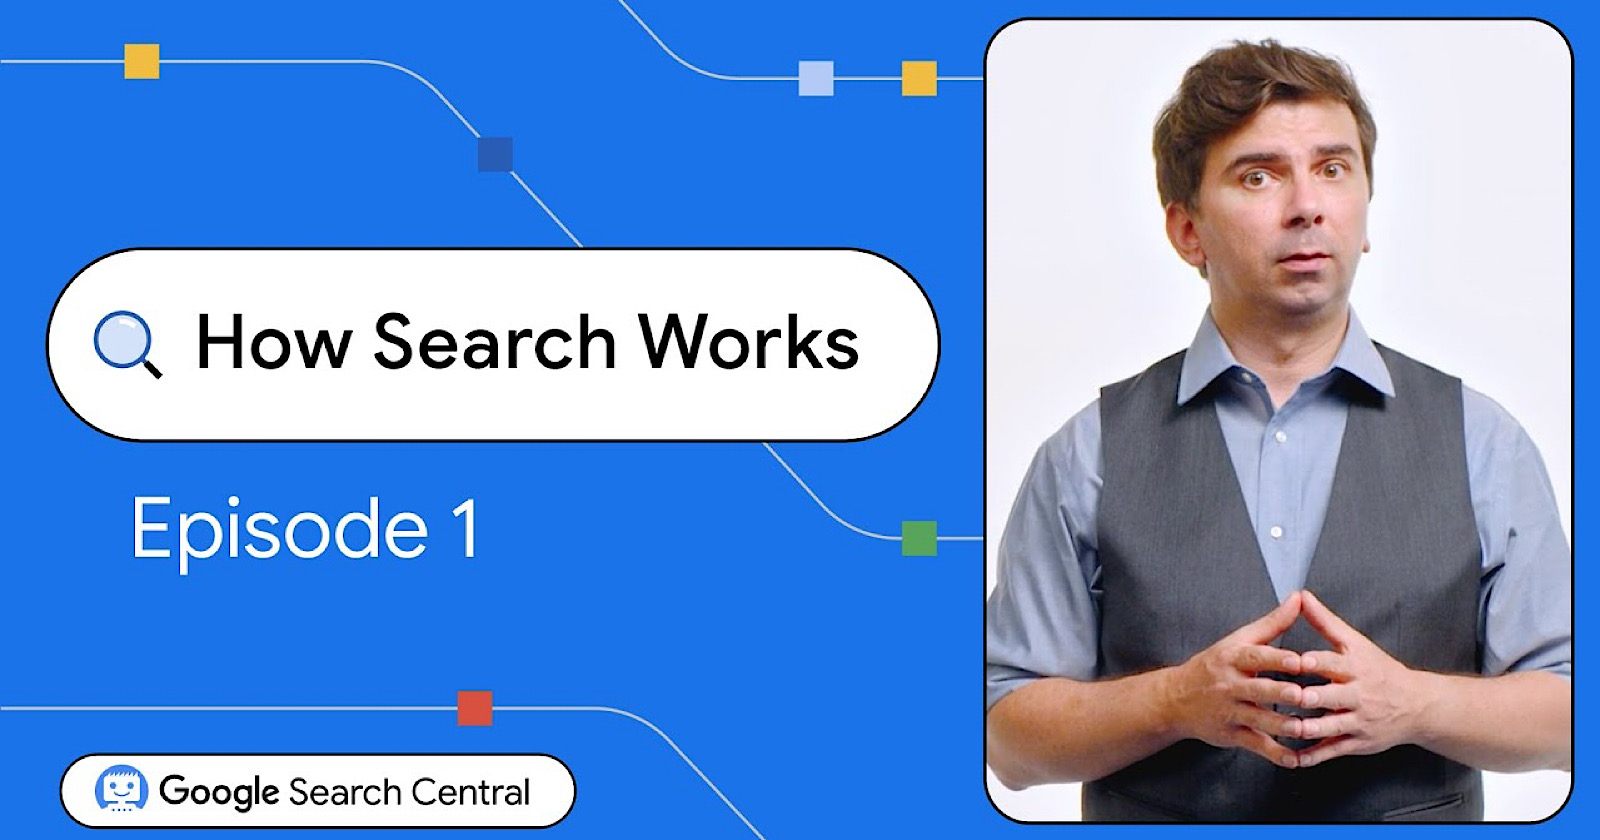 Google Launches "How Search Works" Series To Demystify SEO